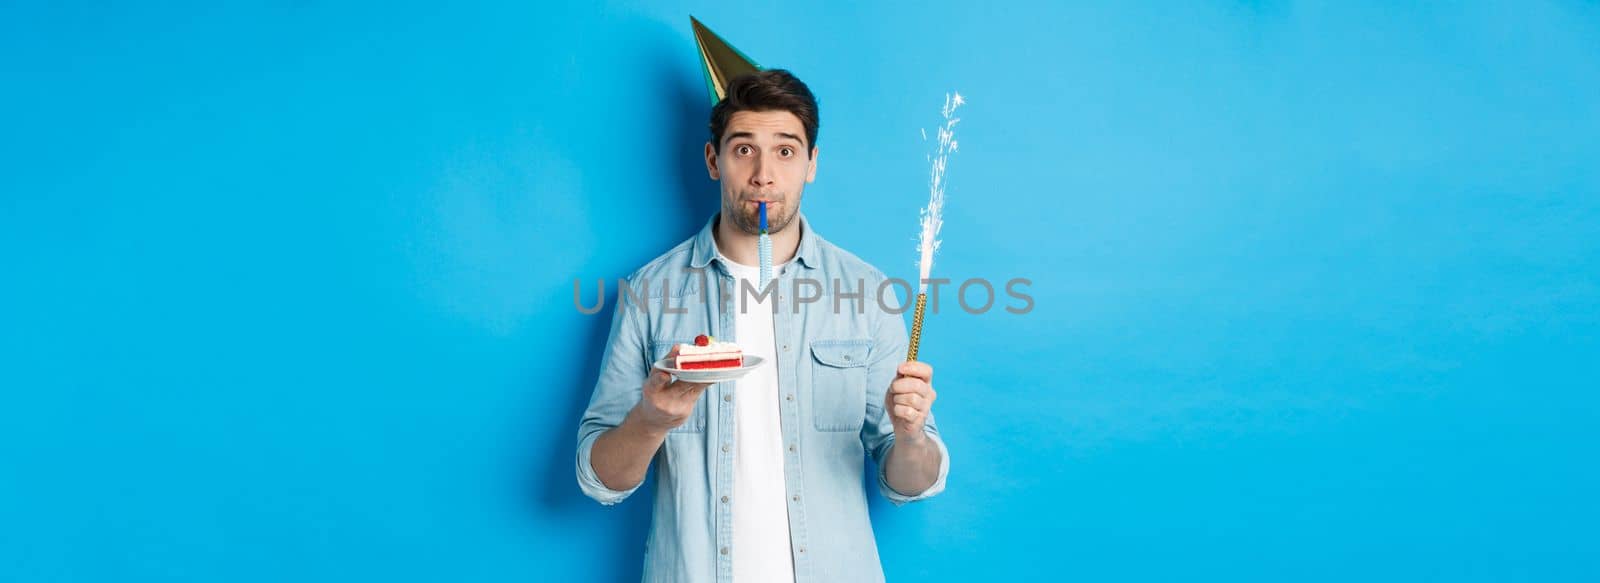 Funny guy celebrating birthday, holding b-day cake, firework and wearing party hat, standing over blue background.